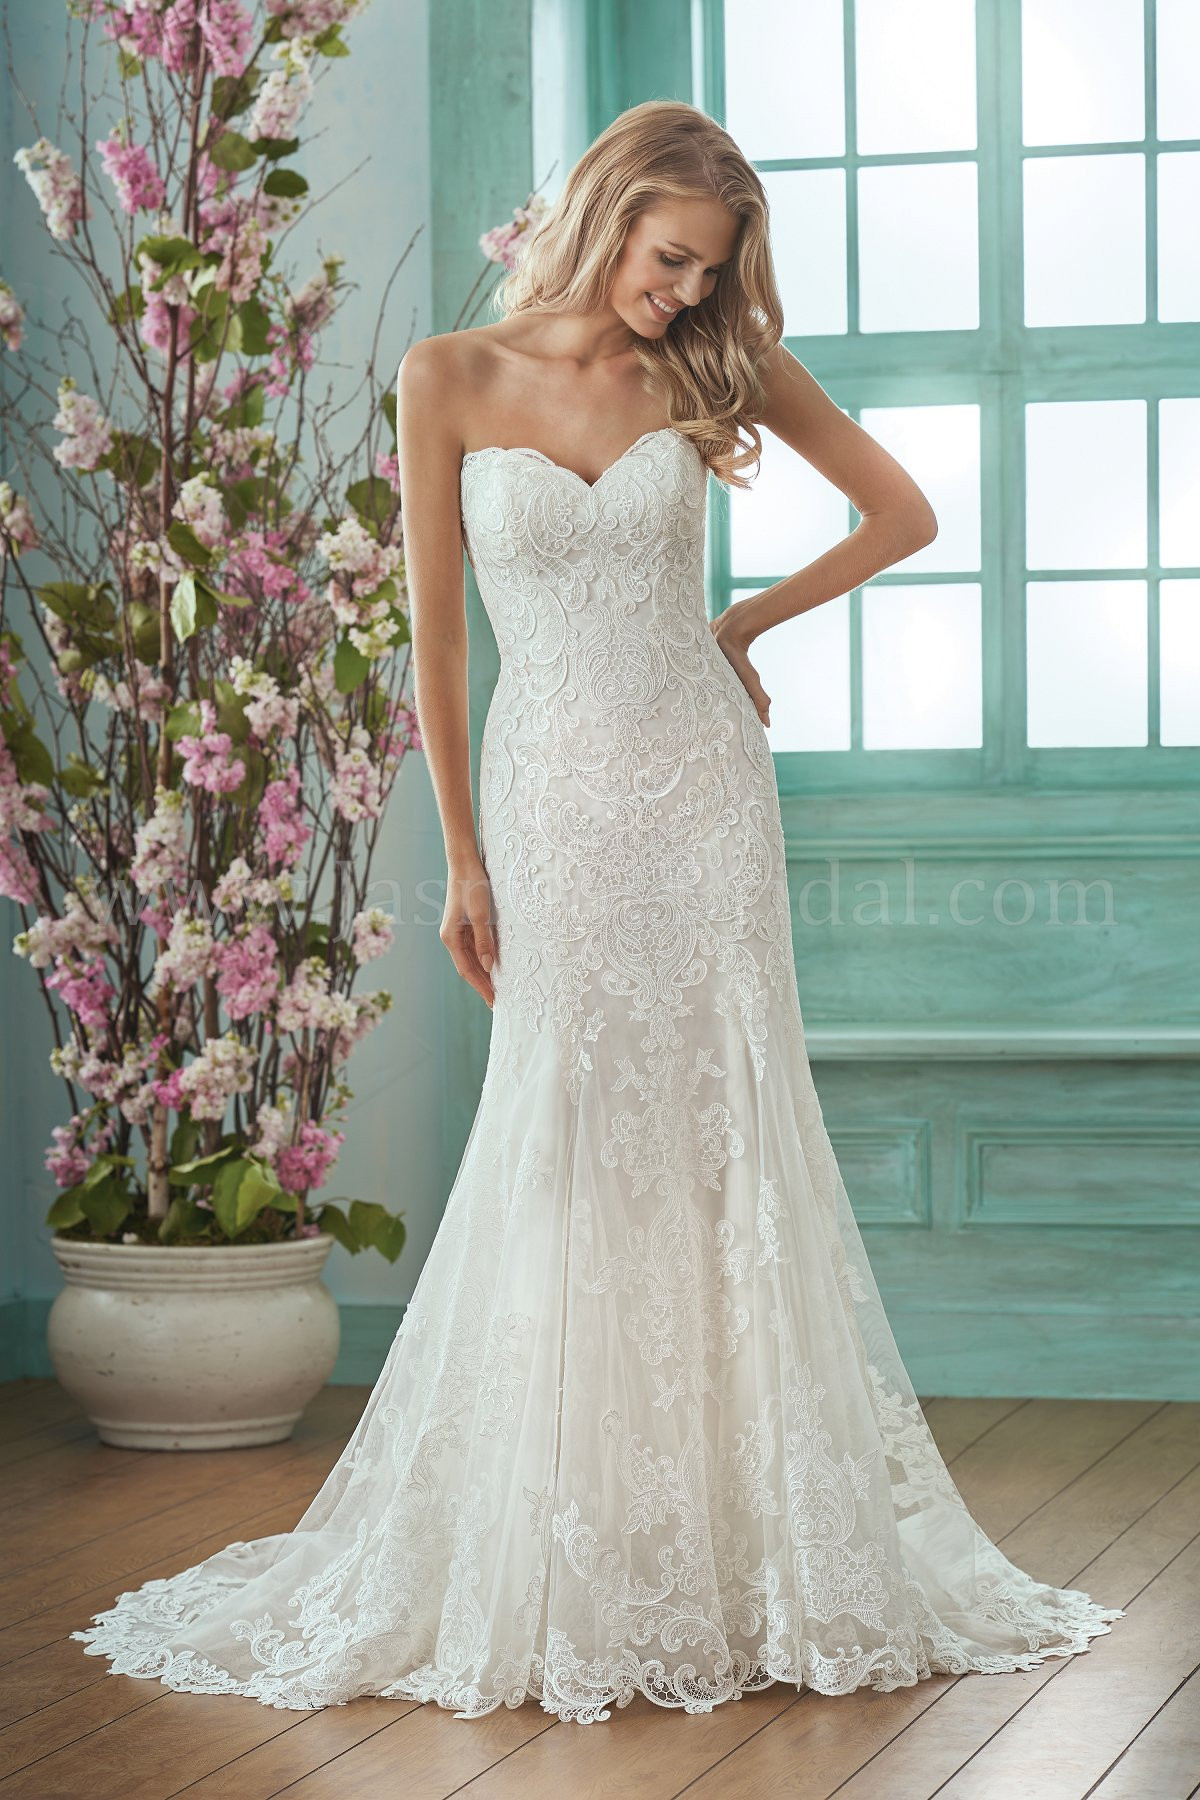 Strapless Wedding Gown
 F Sweetheart Strapless Embroidered Lace & Silky